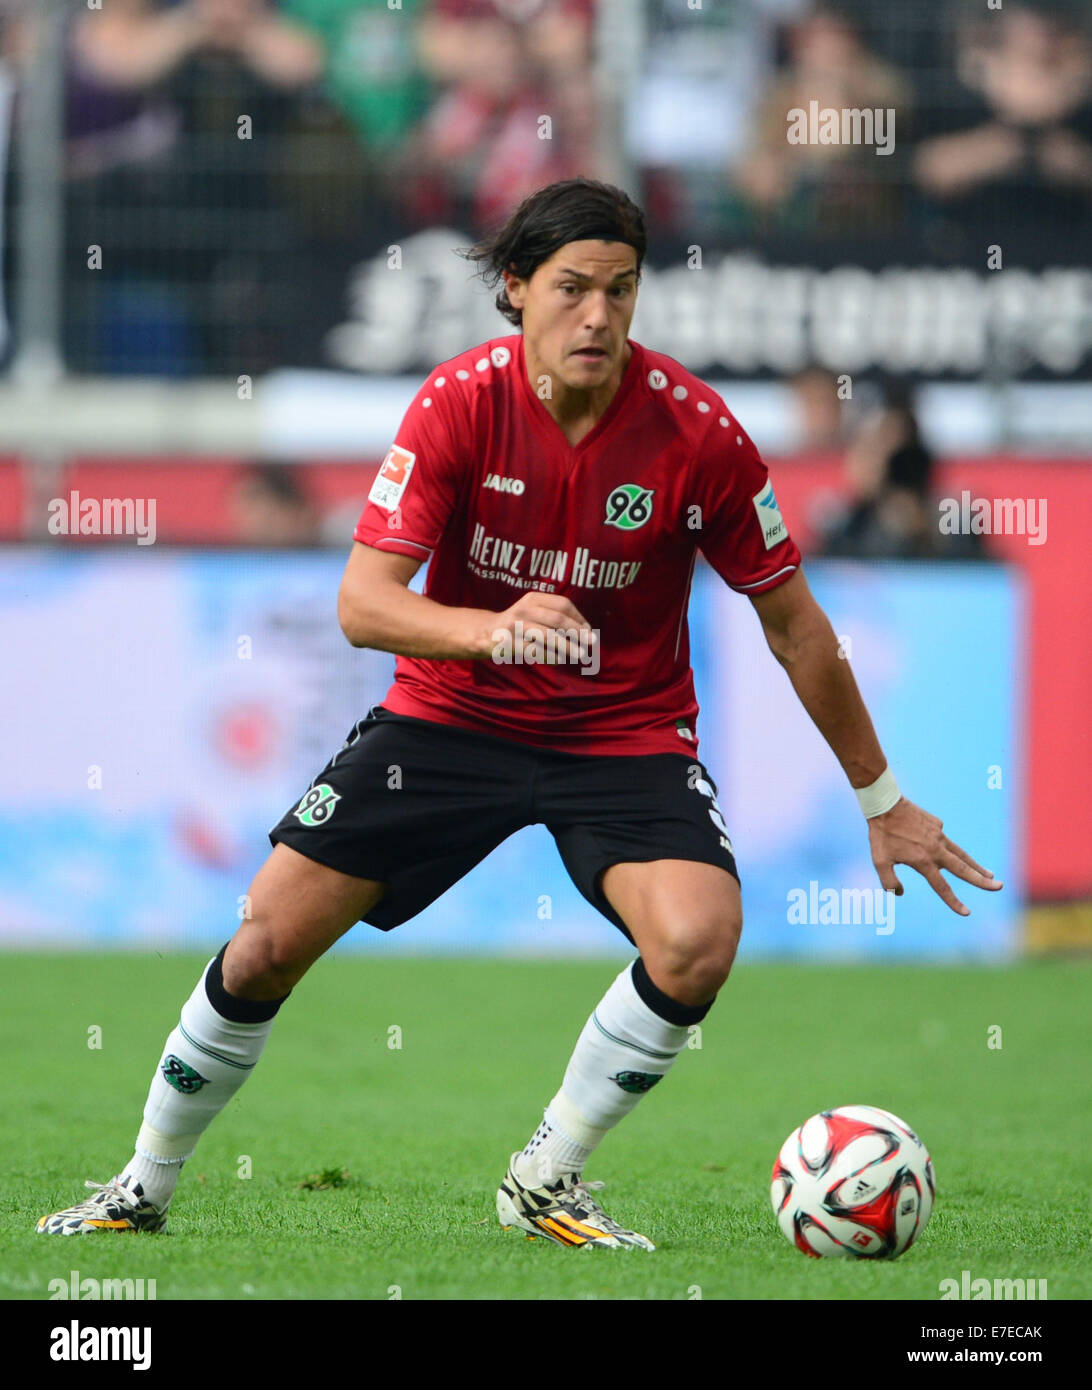 Hanover, Germany. 14th Sep, 2014. Hanover's Miiko Albornoz controls the ball during the Bundesliga soccer match between Hannover 96 and Hamburger SV in Hanover, Germany, 14 September 2014. Photo: Peter Steffen/dpa/Alamy Live News Stock Photo